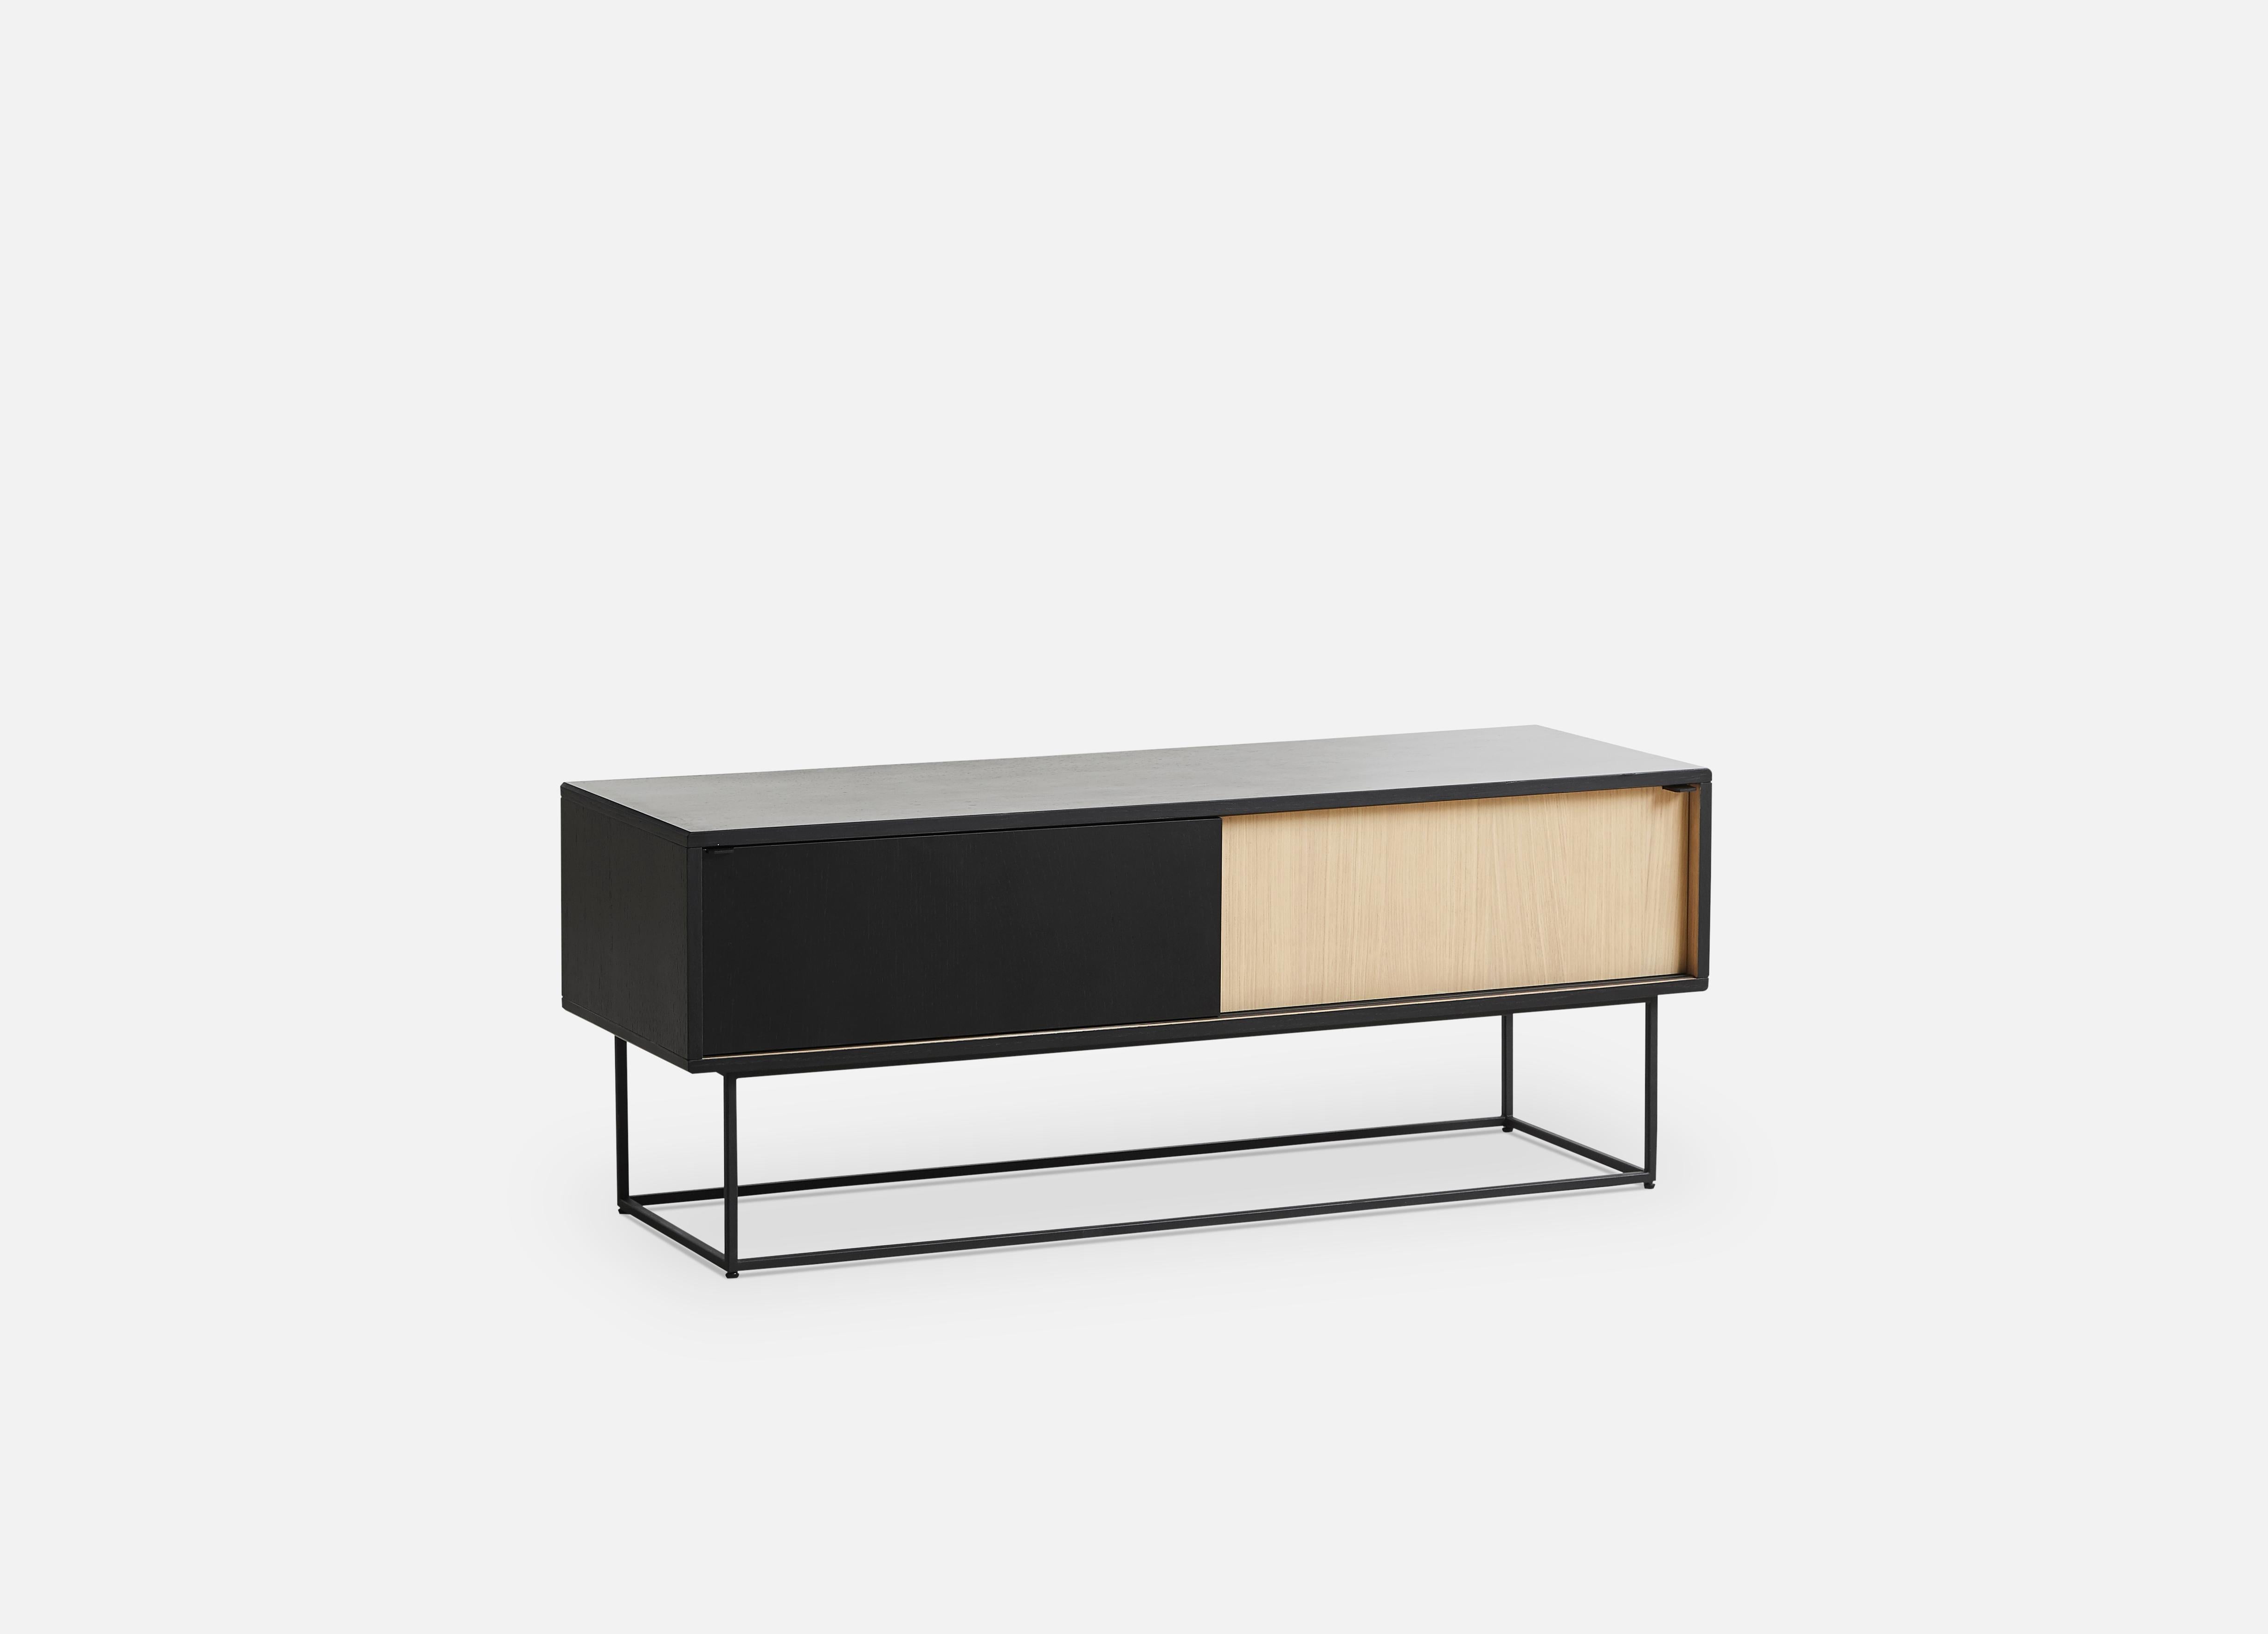 Black and white virka low sideboard by Ropke Design and Moaak
Materials: Oak, metal.
Dimensions: D 40 x W 120 x H 47 cm
Also available in different colours and materials.

The founders, Mia and Torben Koed, decided to put their 30 years of